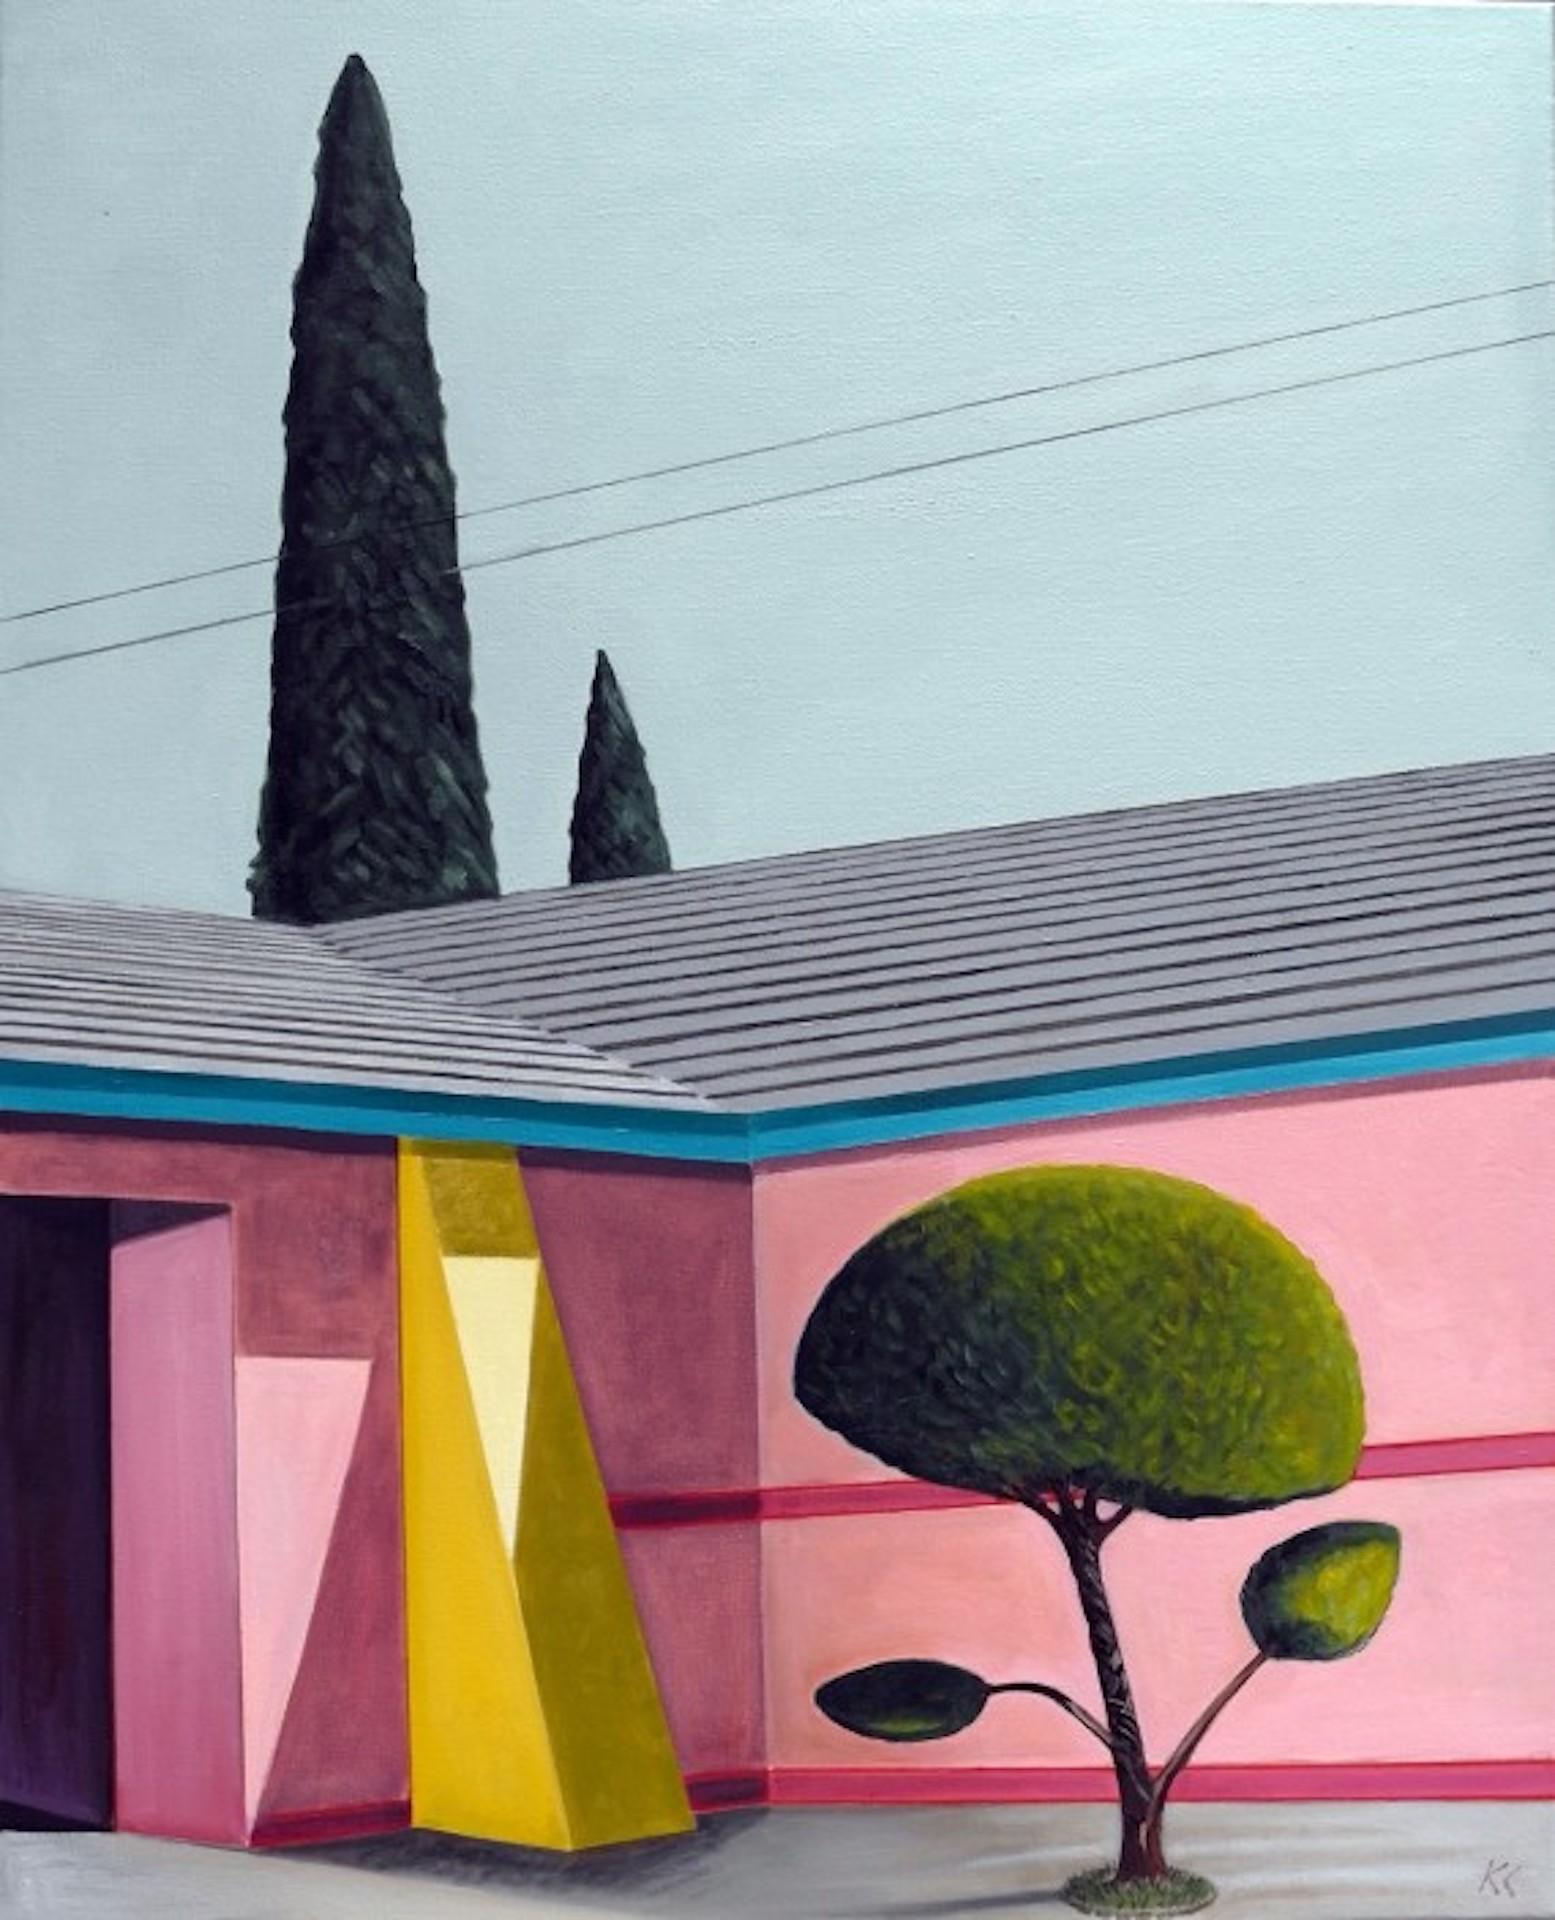 This is a painting form my architectural series of works. I was attracted to the yellows and pinks of the West Coast architecture depicting sculpture and topiary.
Karen Lynn is available online and in our gallery at Wychwood Art. Karen is inspired